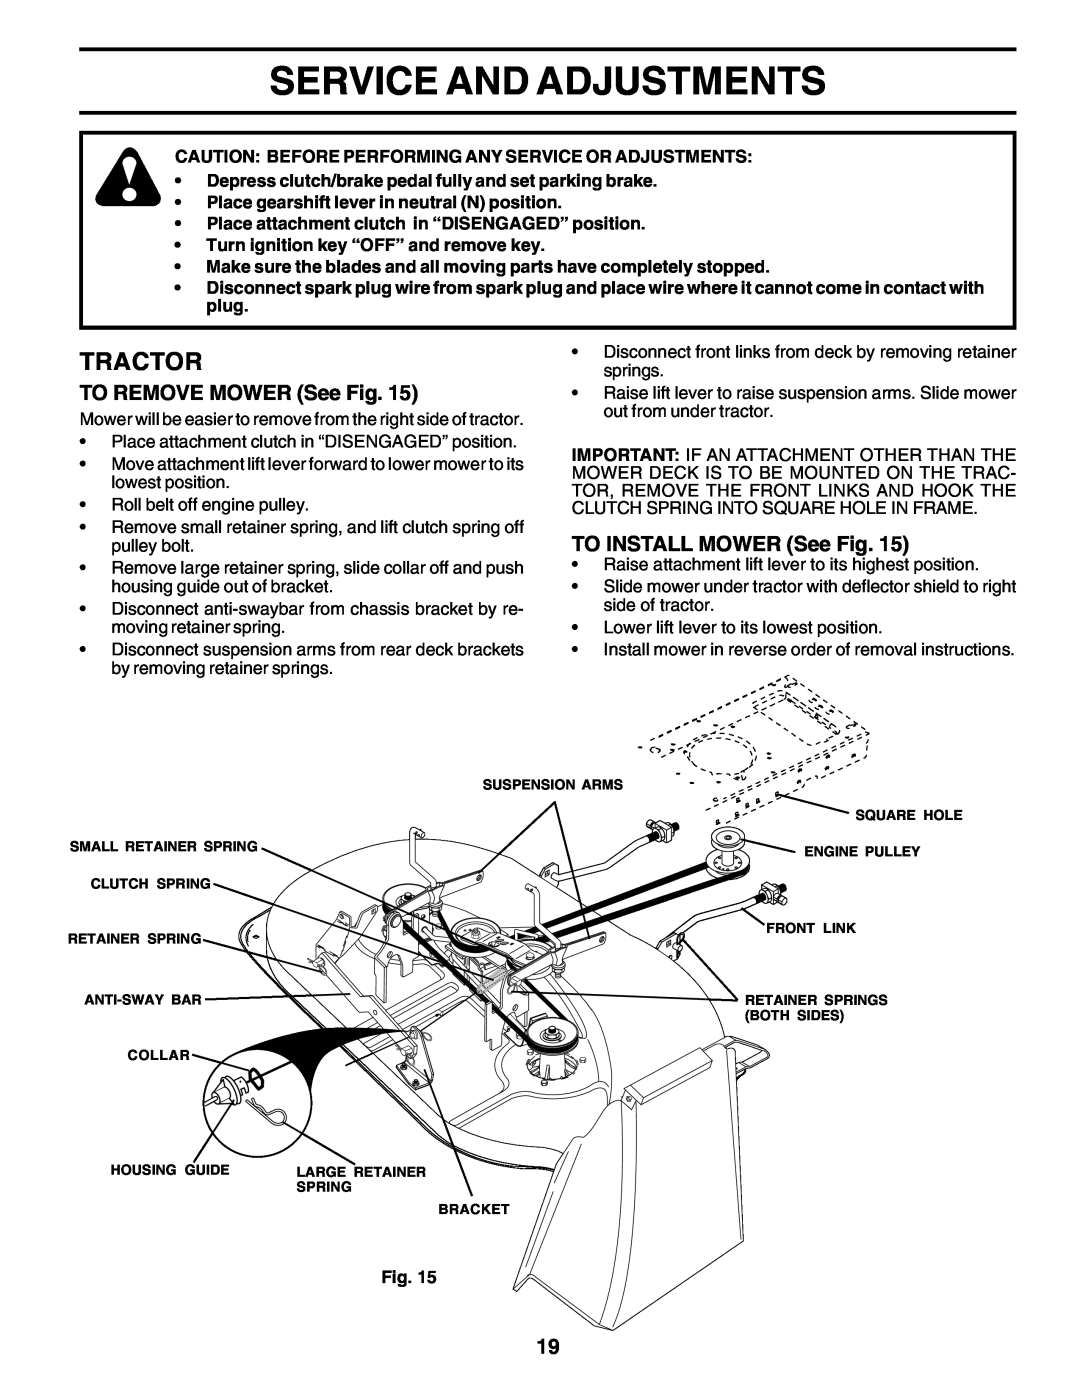 Weed Eater WE12538J manual Service And Adjustments, Tractor, TO REMOVE MOWER See Fig, TO INSTALL MOWER See Fig 